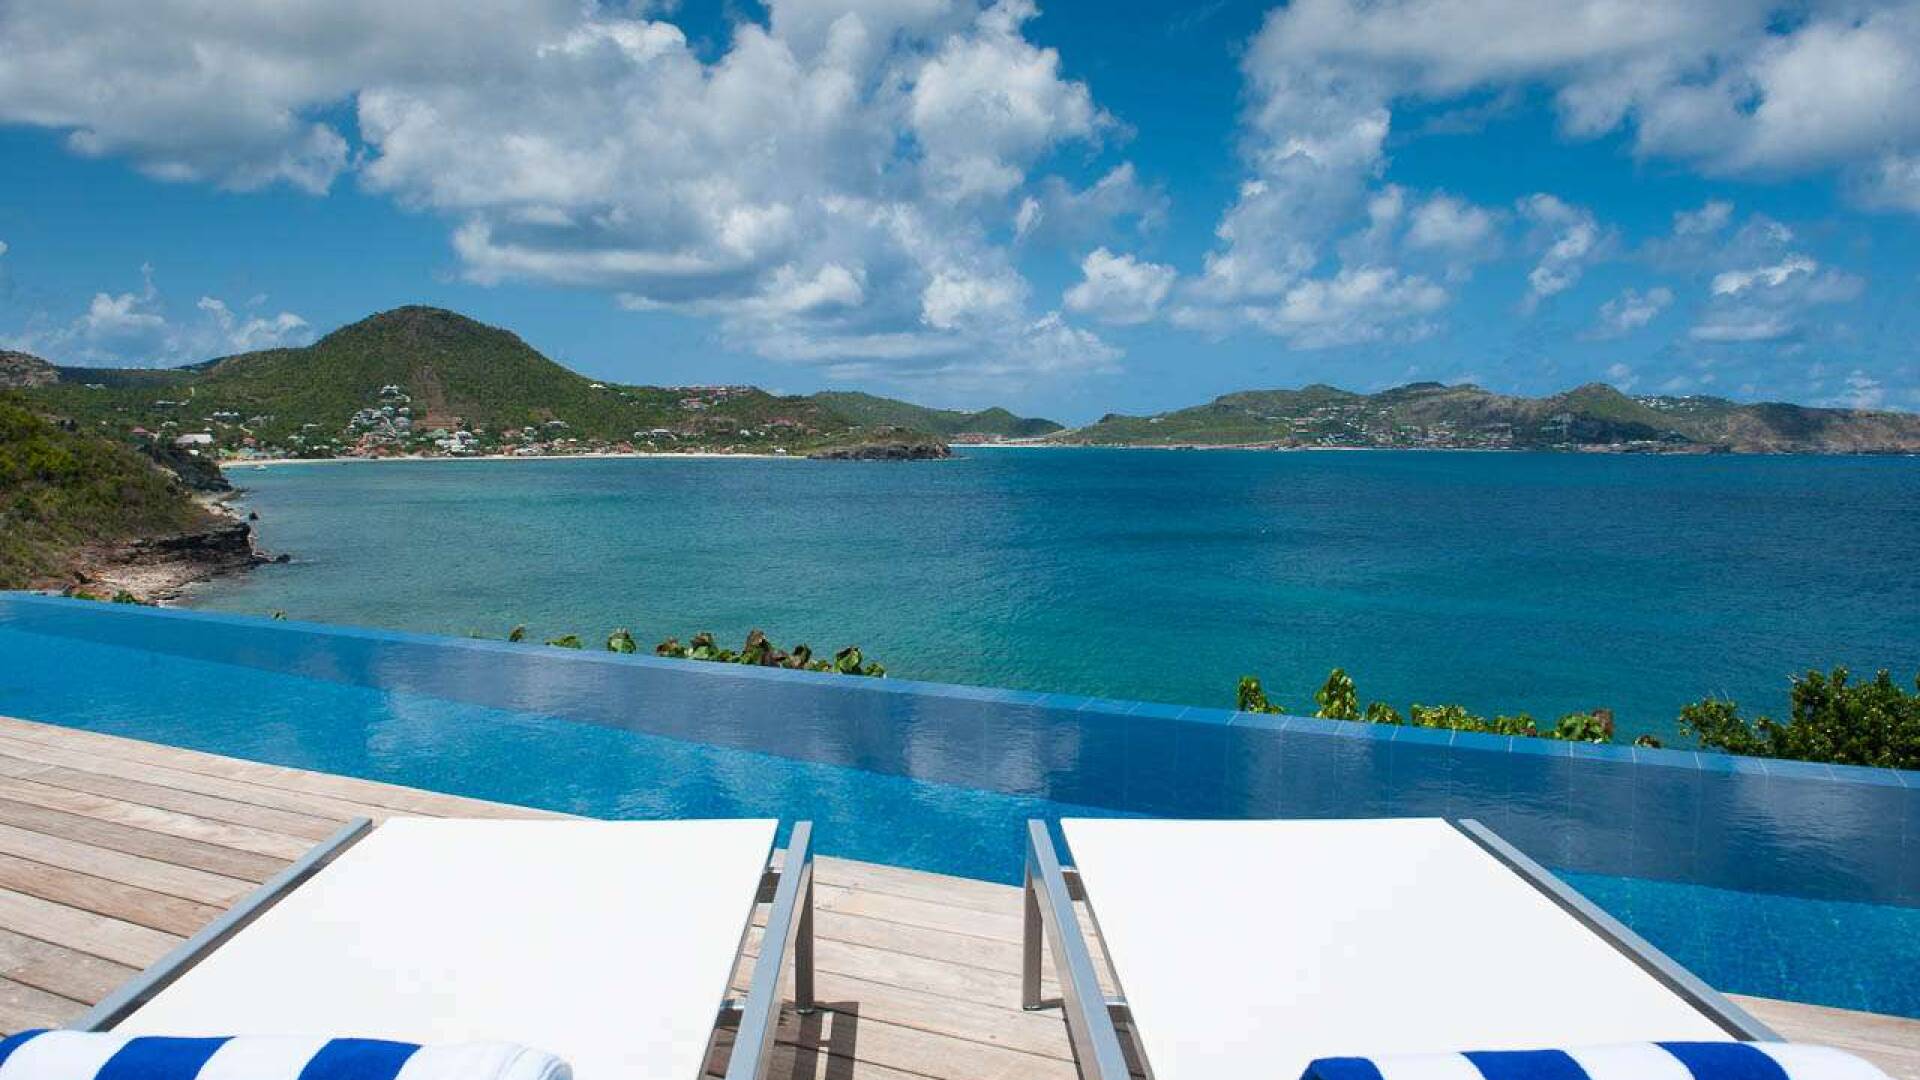 The view from WV VPM, Pointe Milou, St. Barthelemy